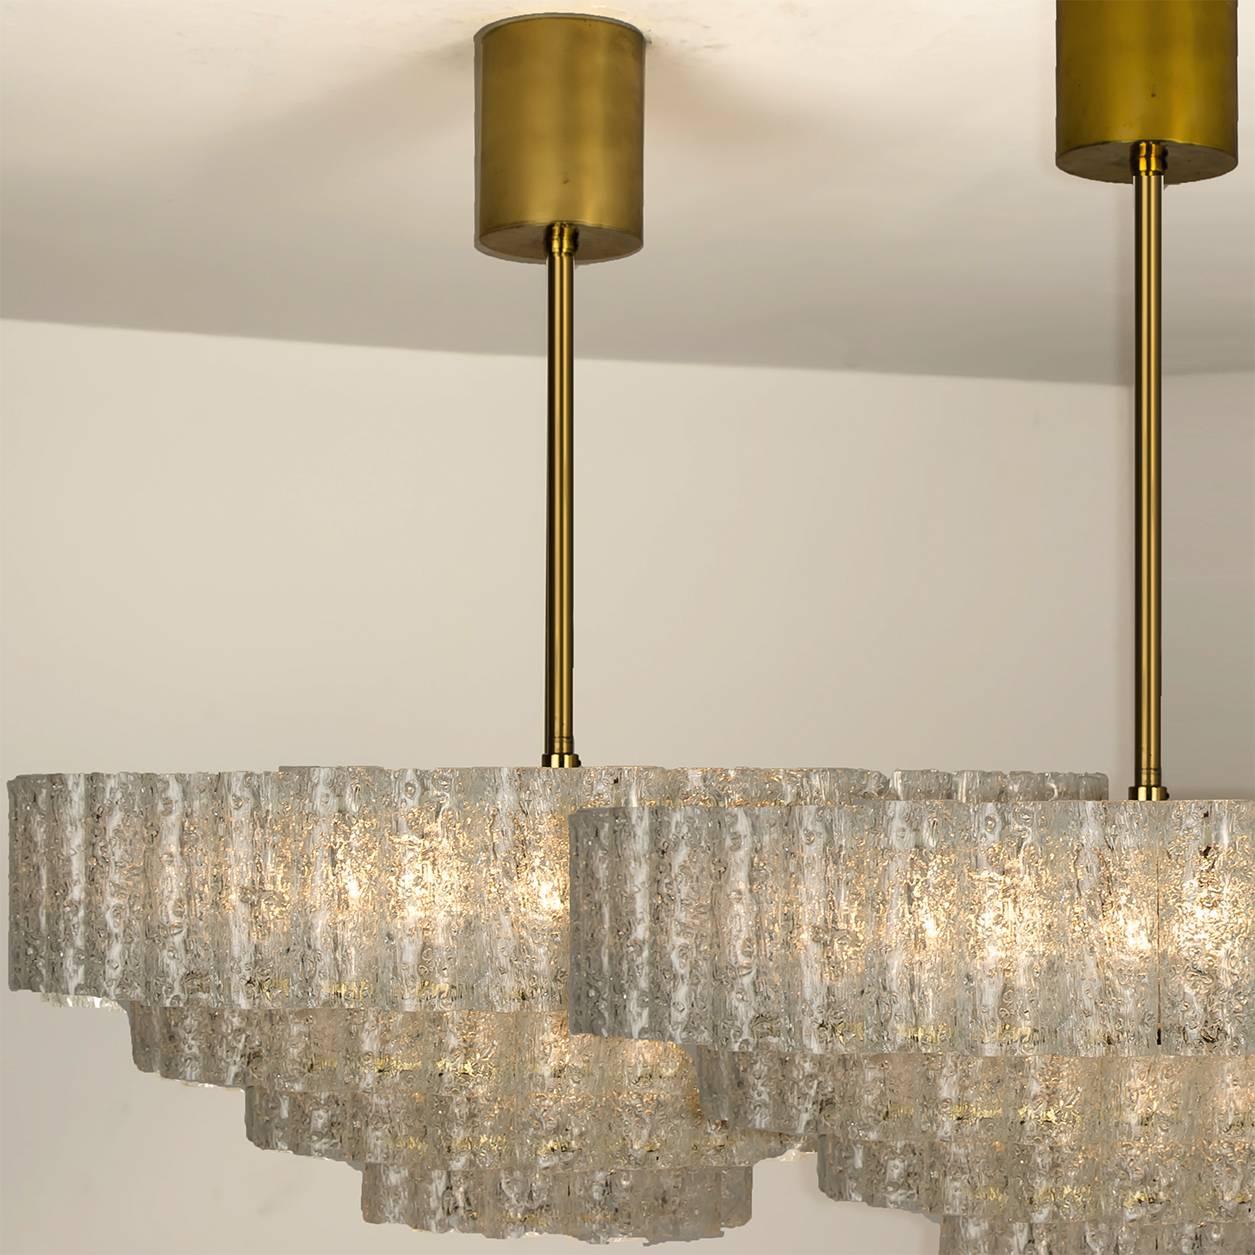 Set of Three Large Glass Brass Light Fixtures by Doria, Germany, 1969 For Sale 3